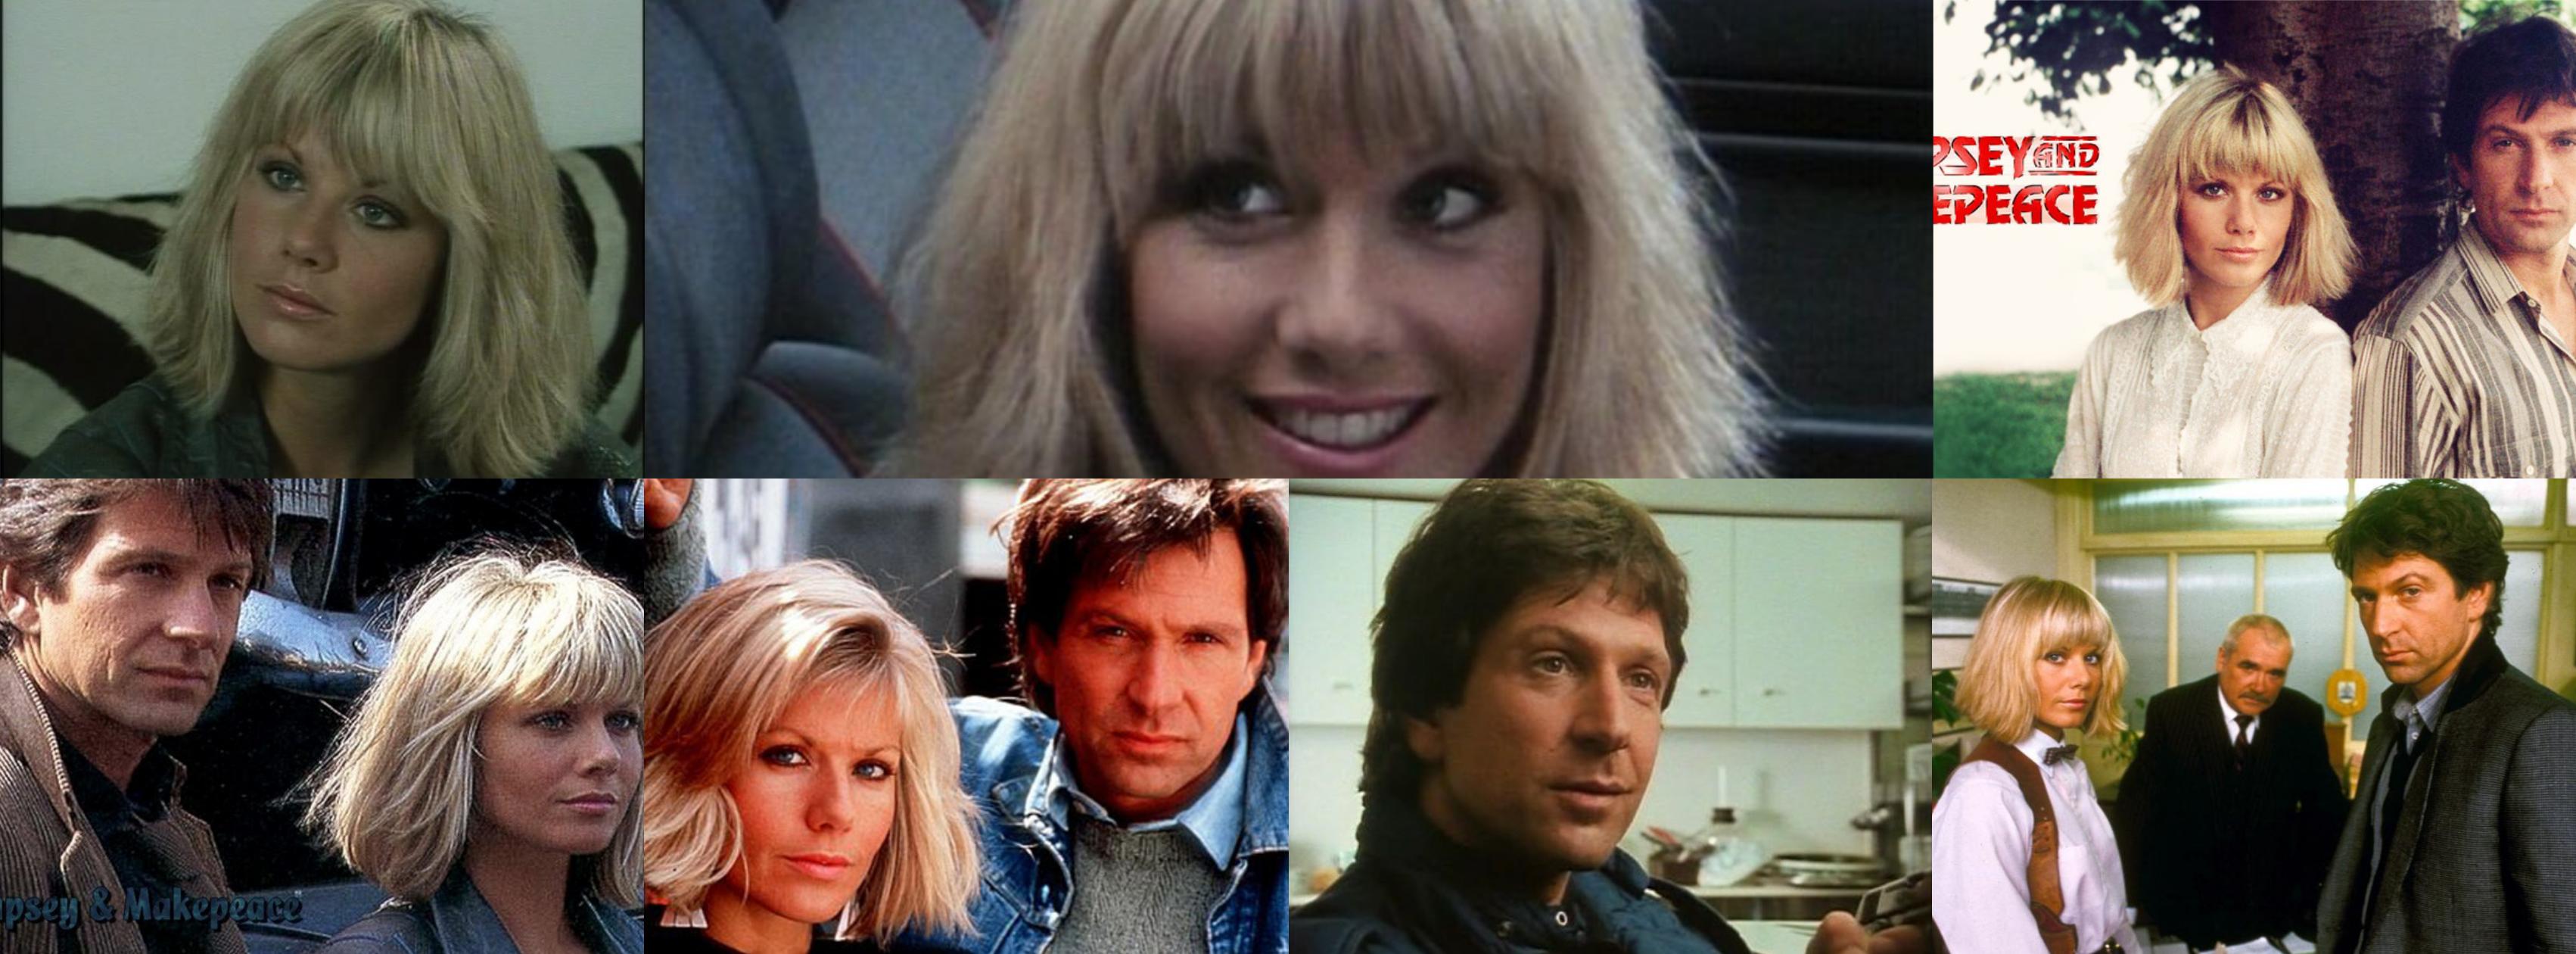 Dempsey and Makepeace.